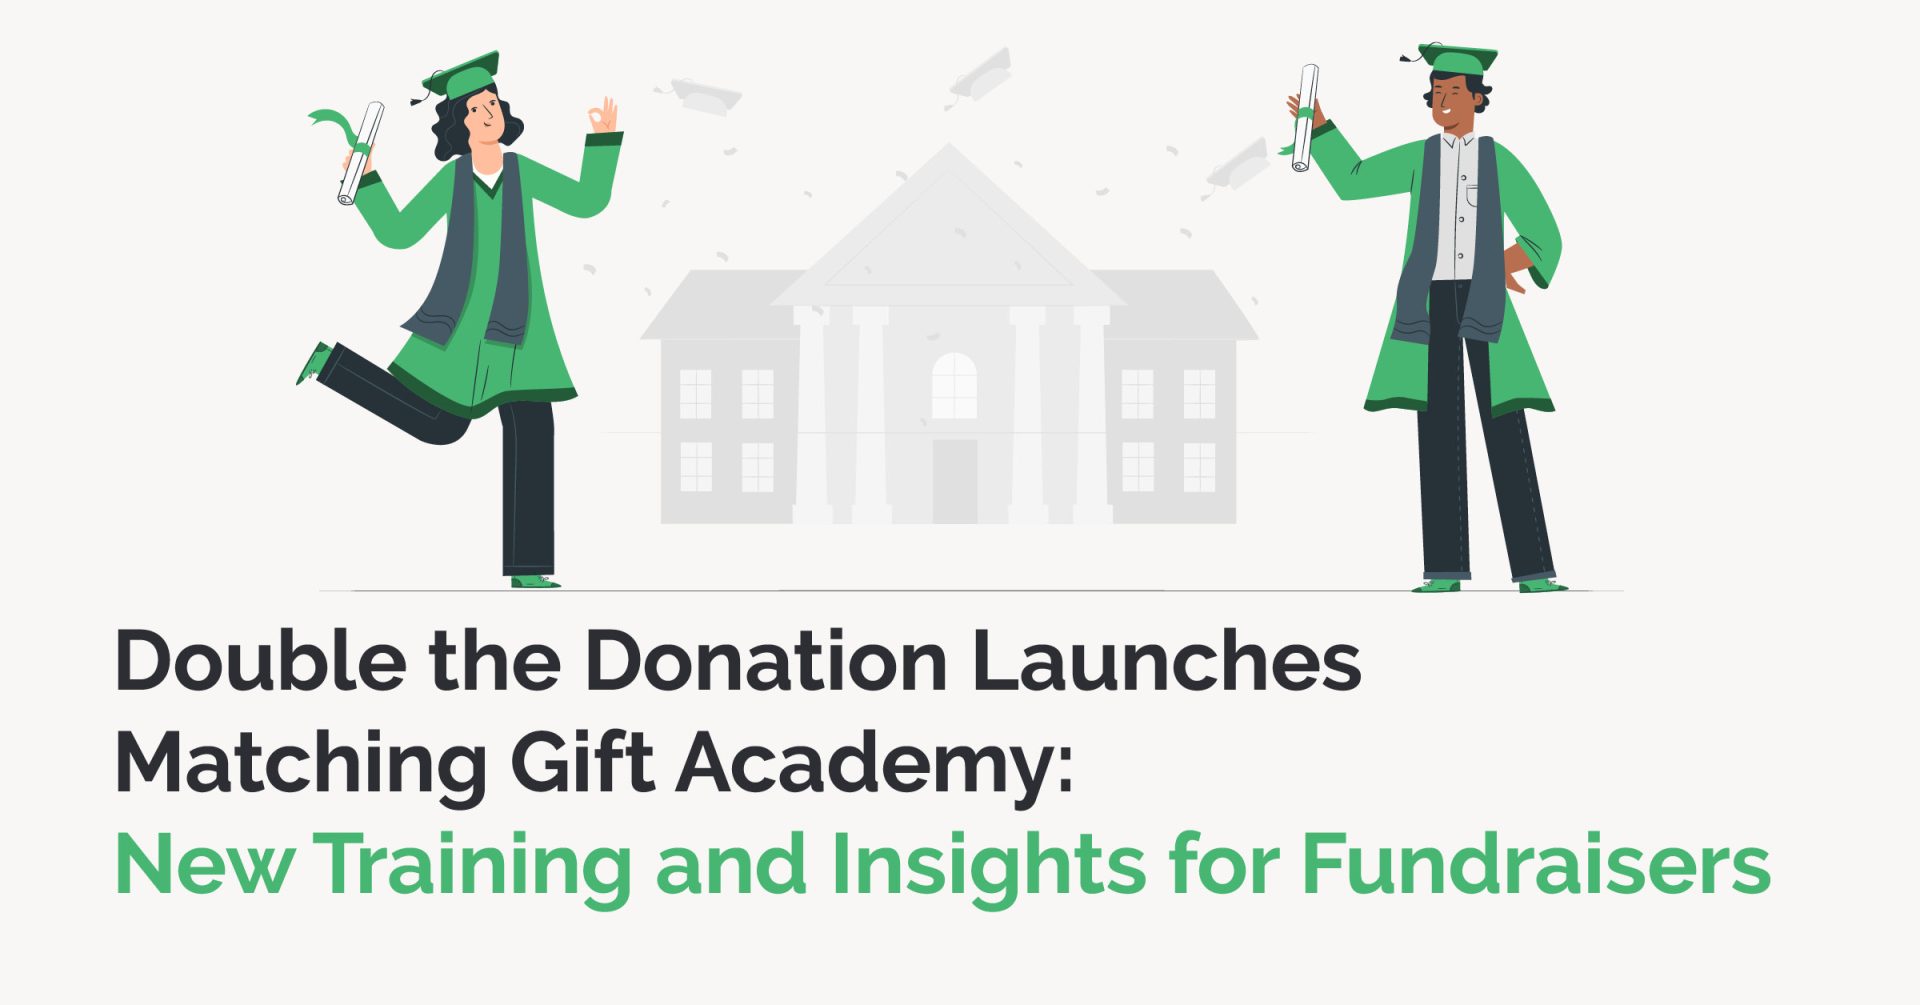 Double the Donation launches Matching Gift Academy: New Training and Insights for Fundraisers